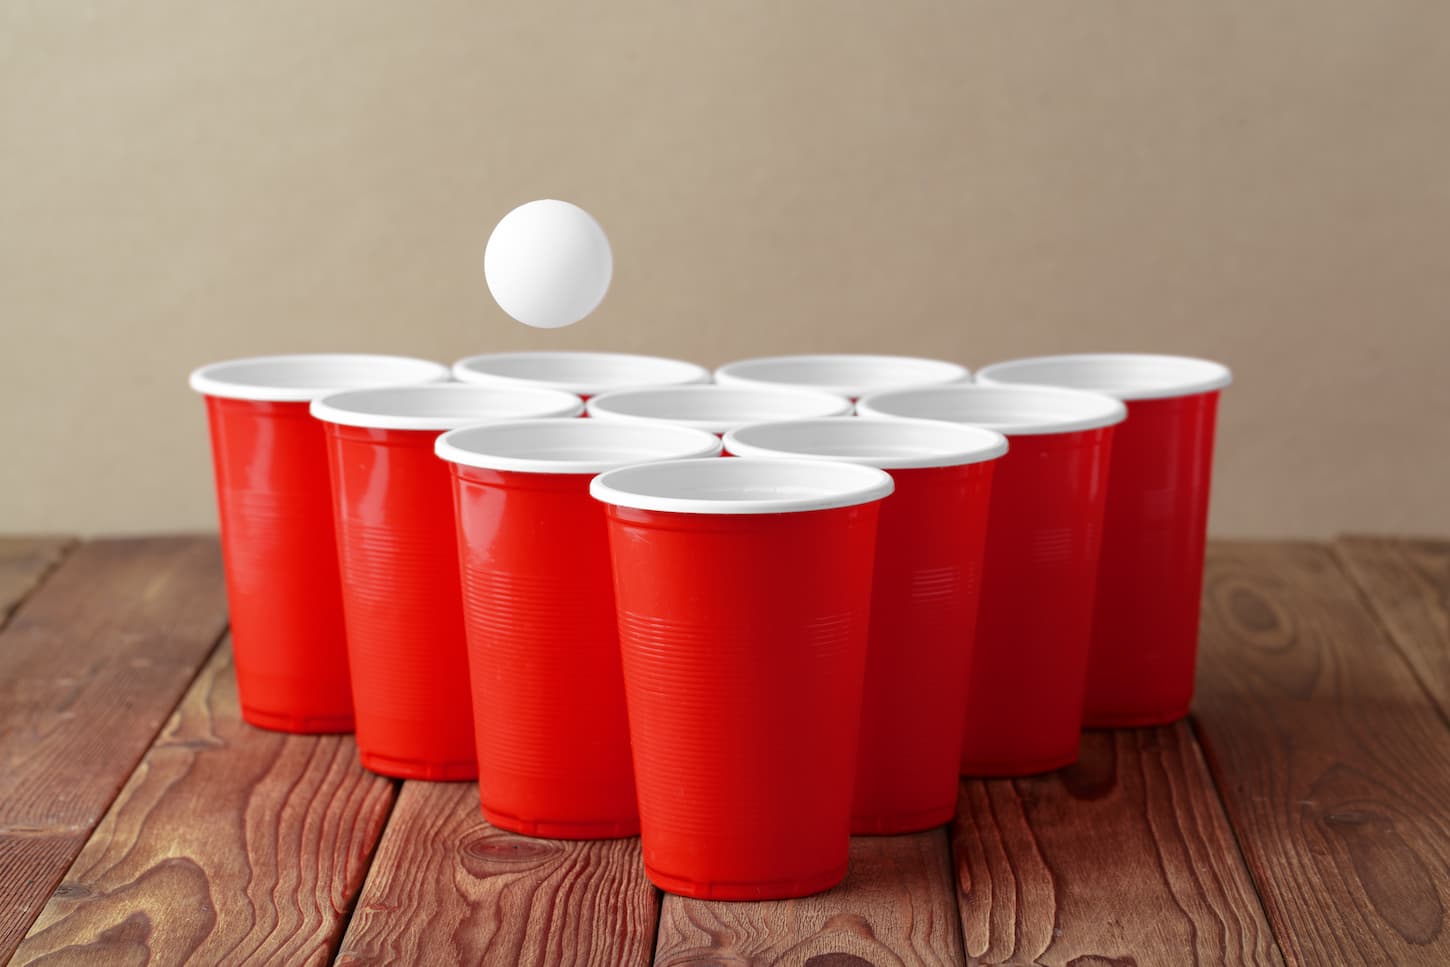 An image of a College party sport - beer pong.